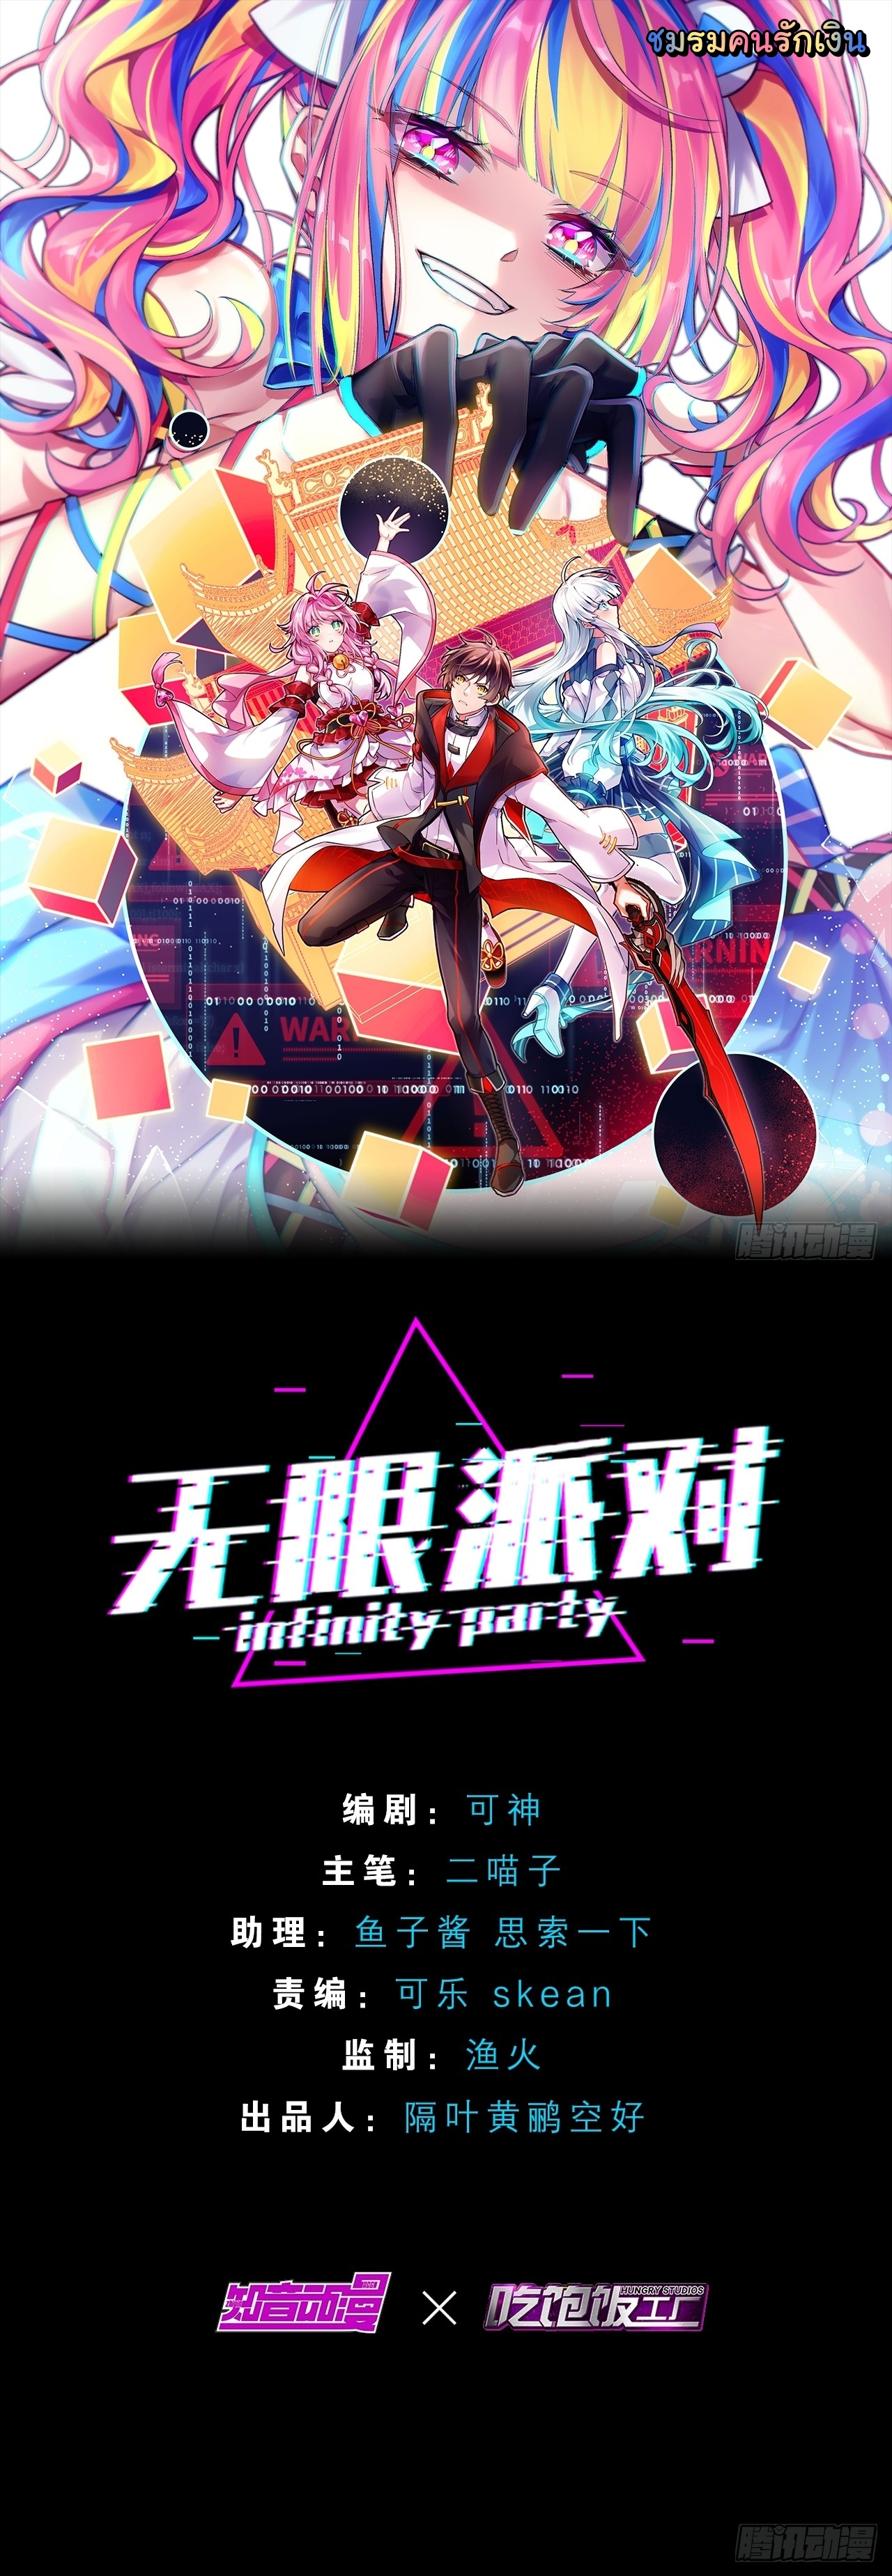 Infinity party 1 (1)